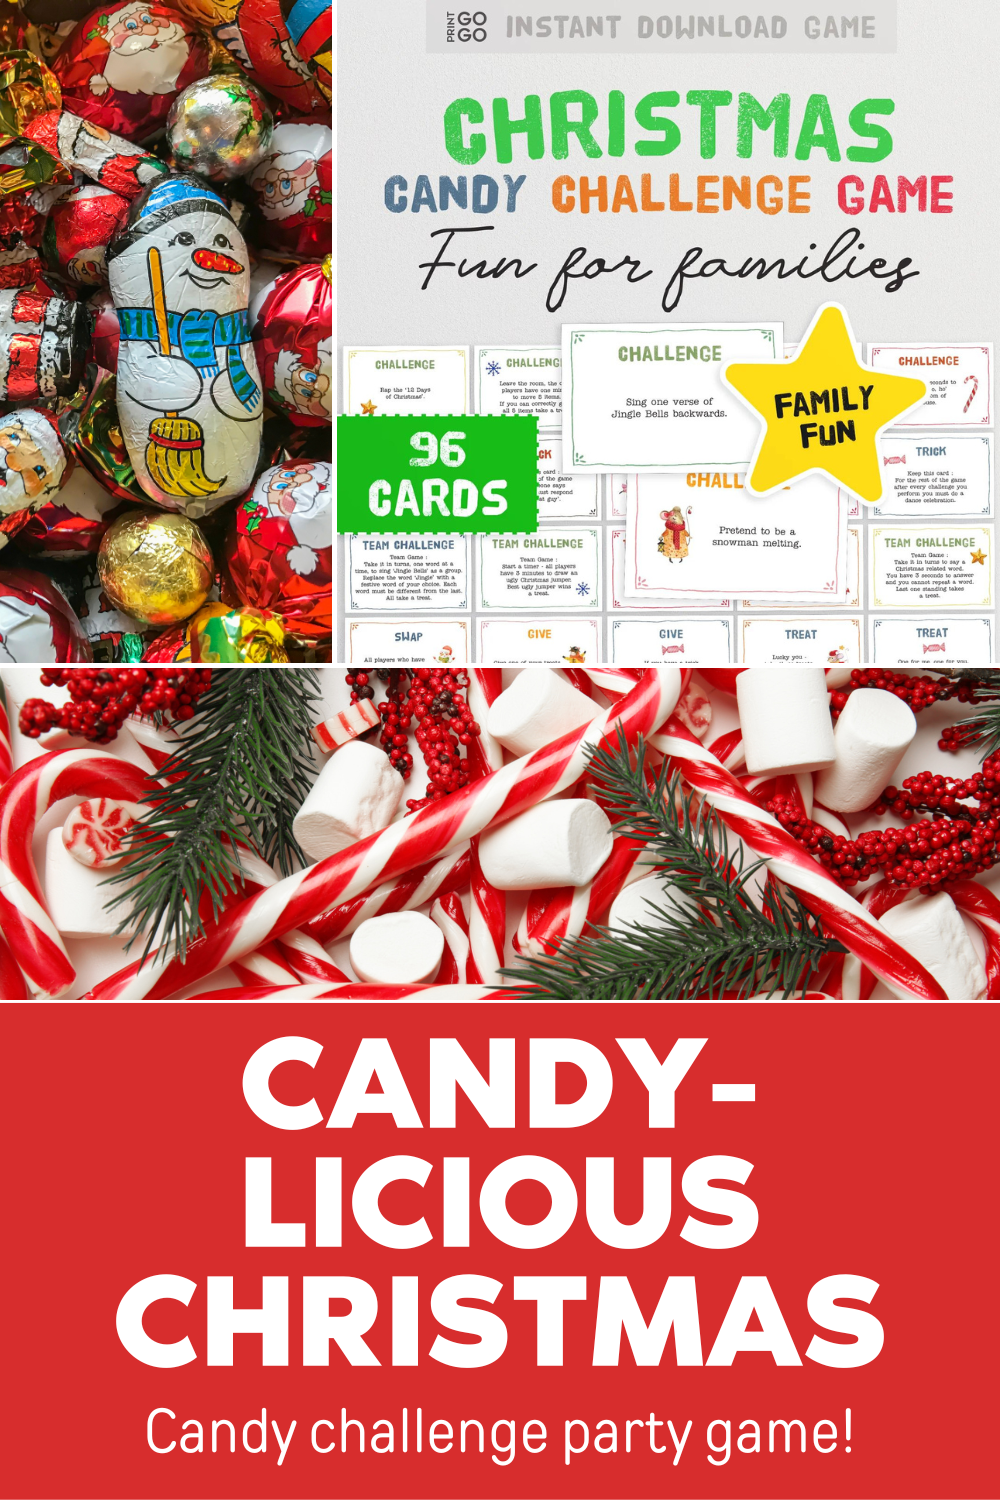 The Candy-licious Christmas Challenge Game for Kids!